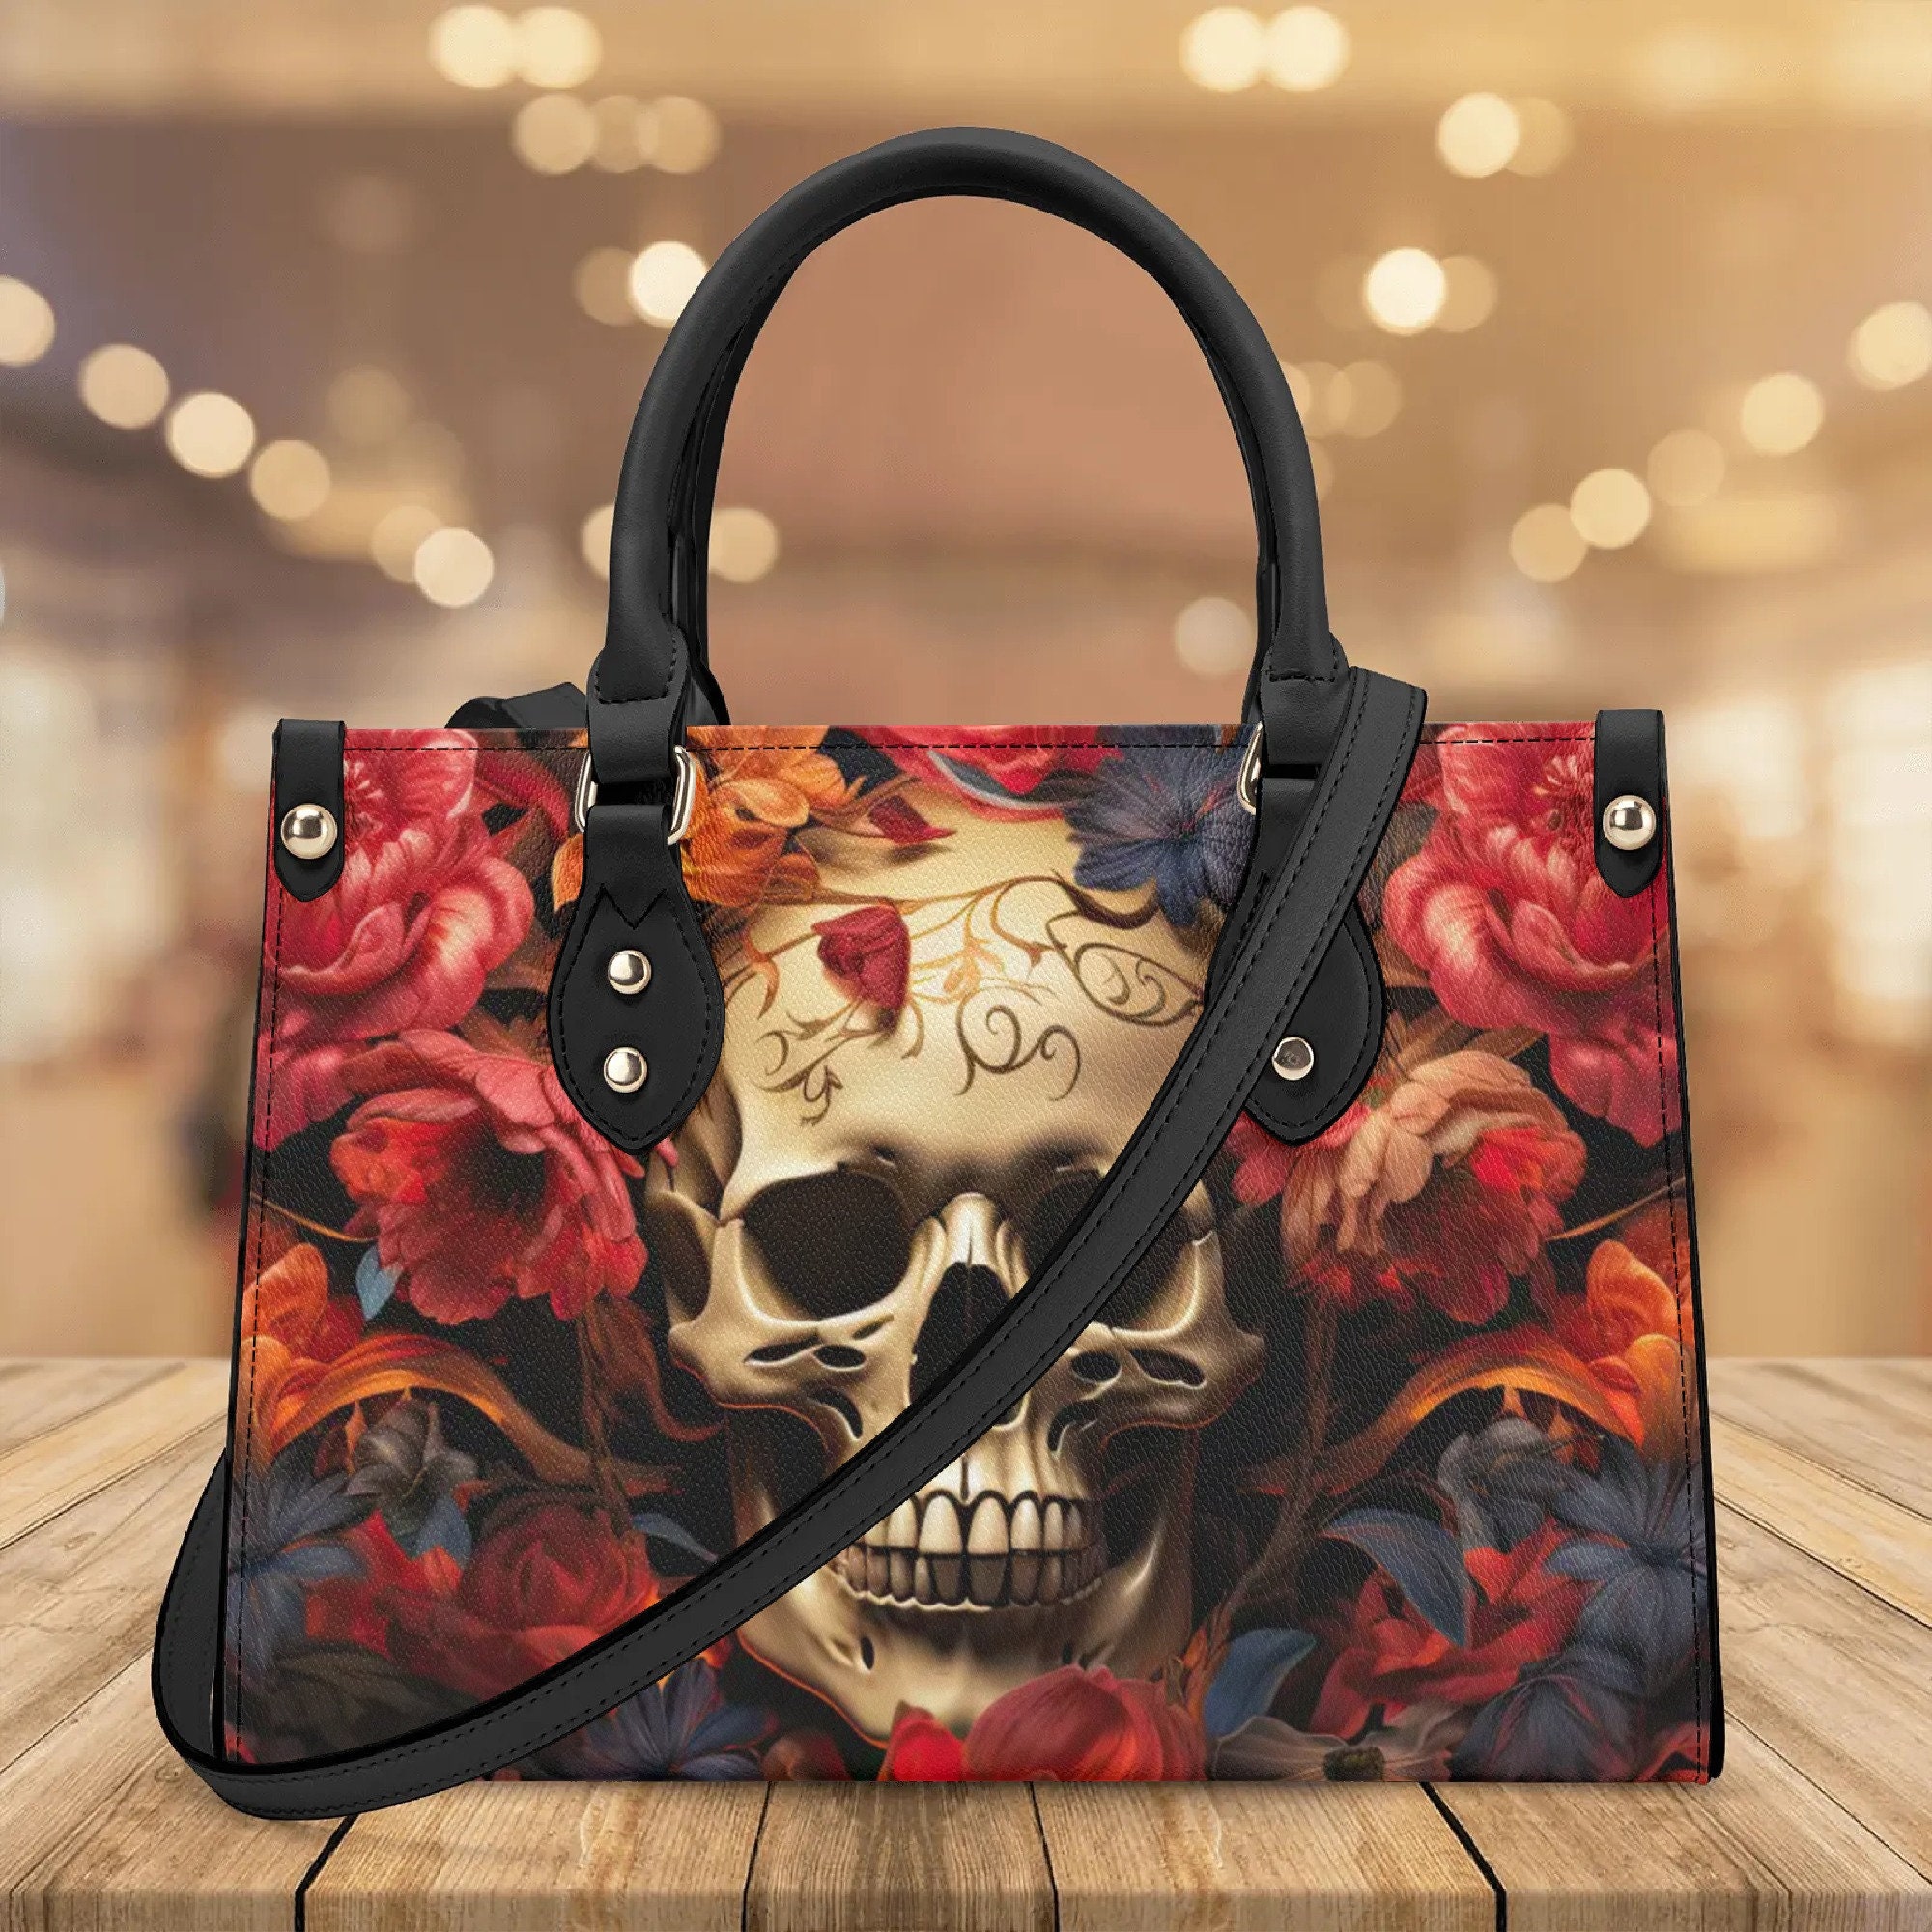 Gothic Skull Floral Handbag, Unique Goth Shoulder Bag, Fashion Purse Accessory, Whimsigoth Crossbody Bag Gift for Her, Macabre Aesthetic